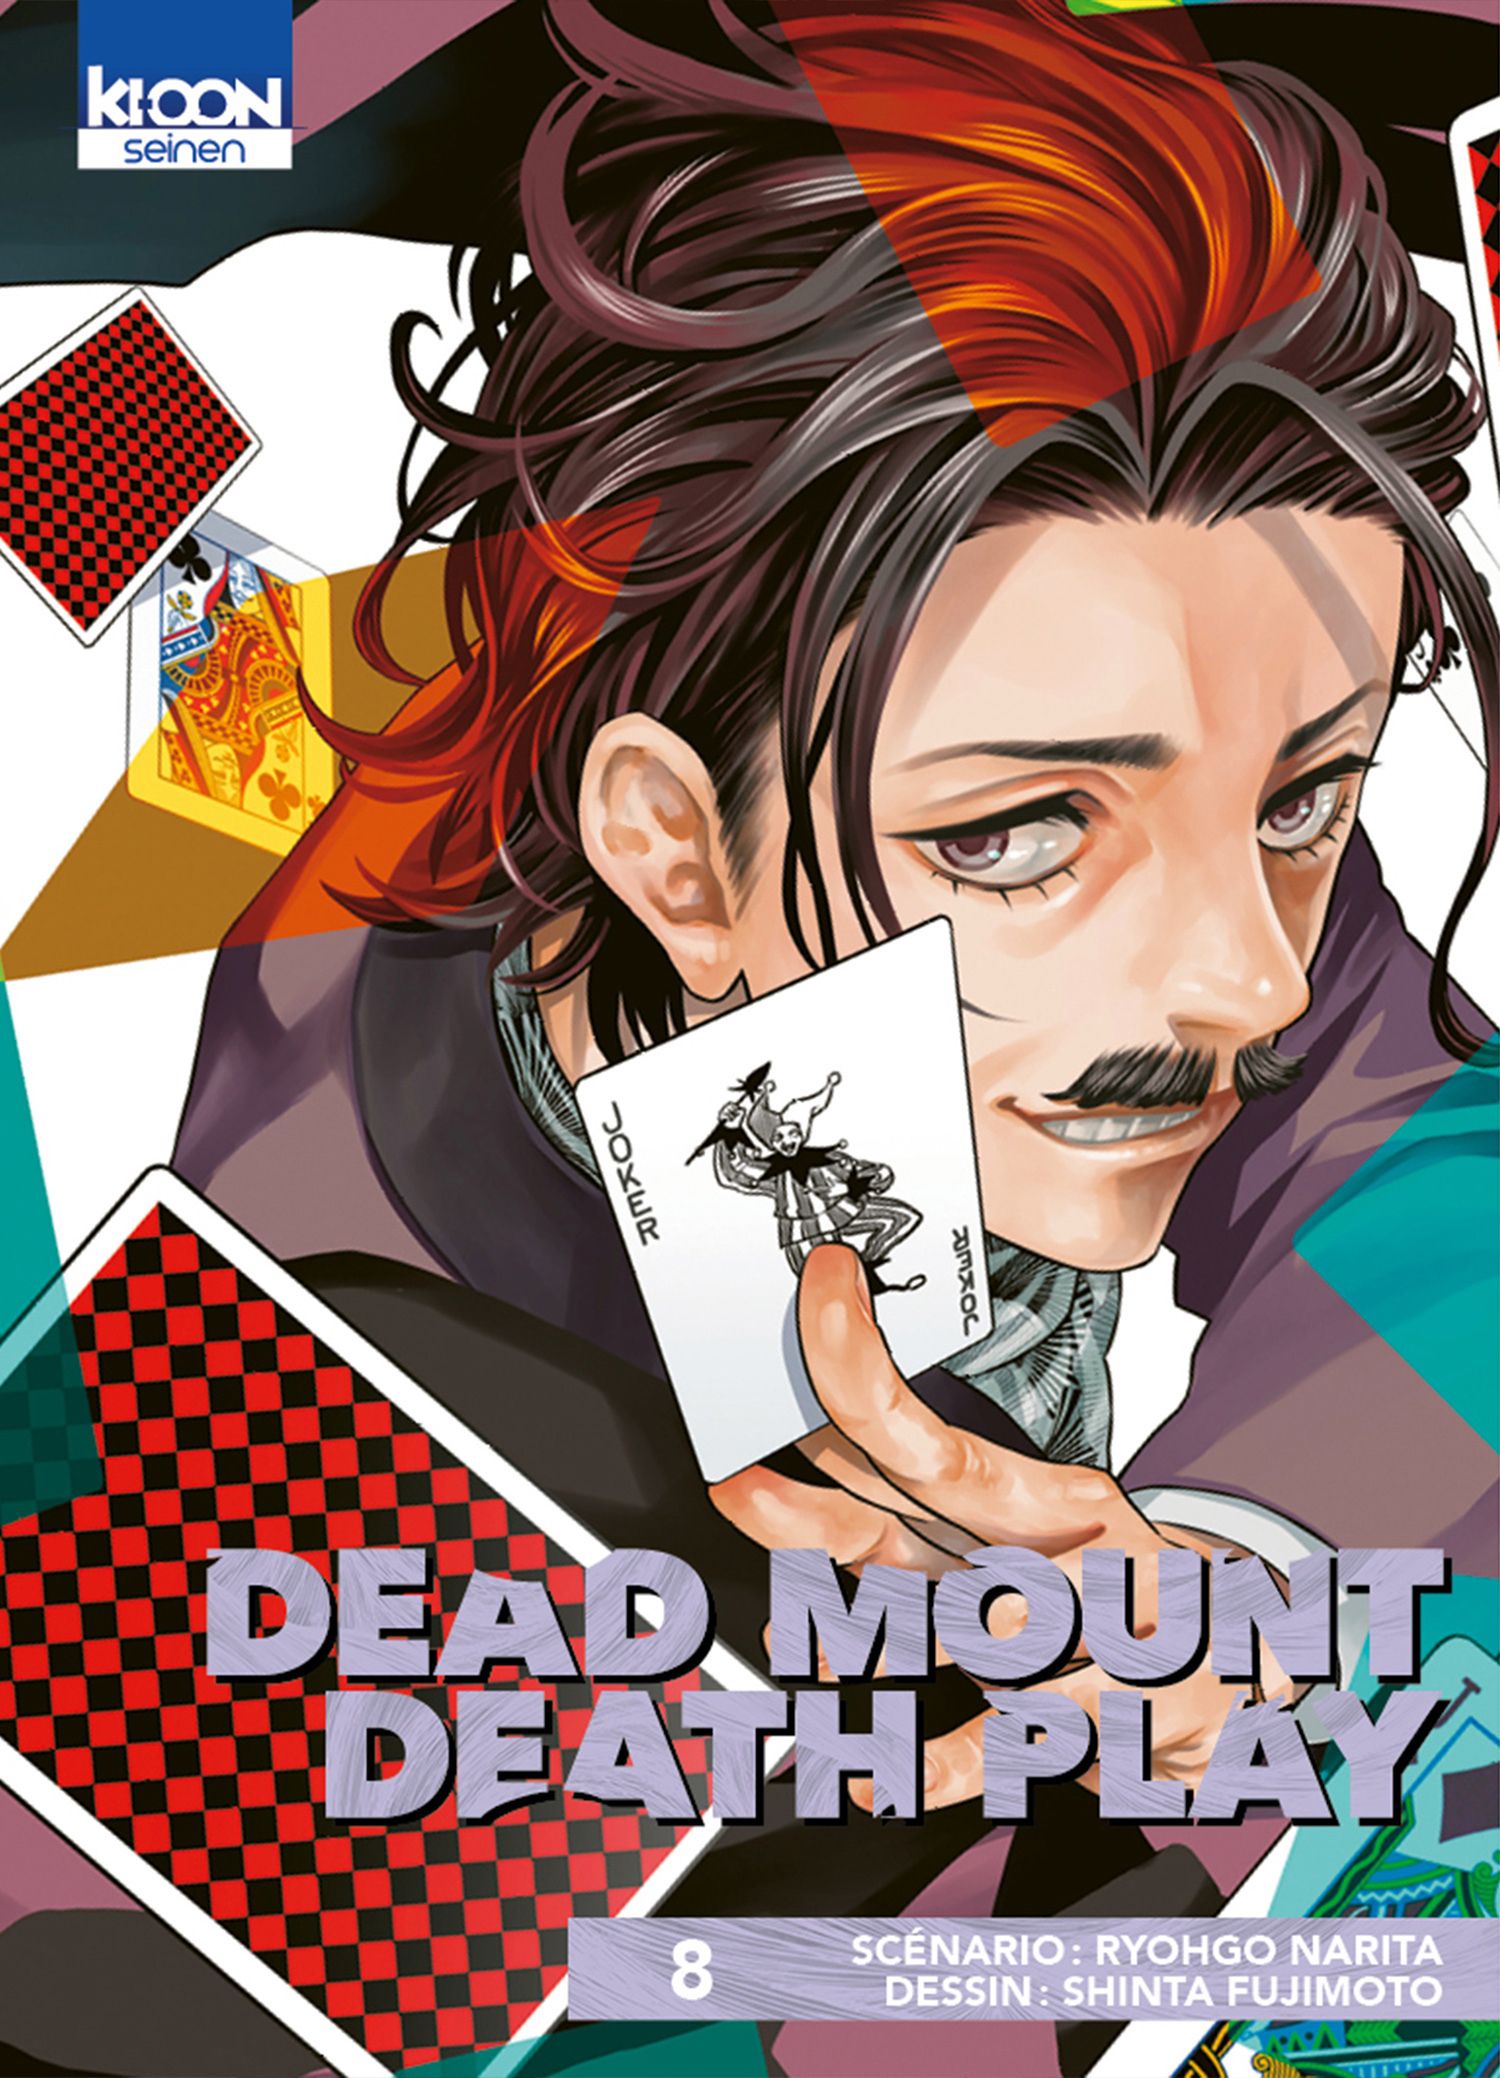 Dead Mount Death Play Episode 1 Review - But Why Tho?